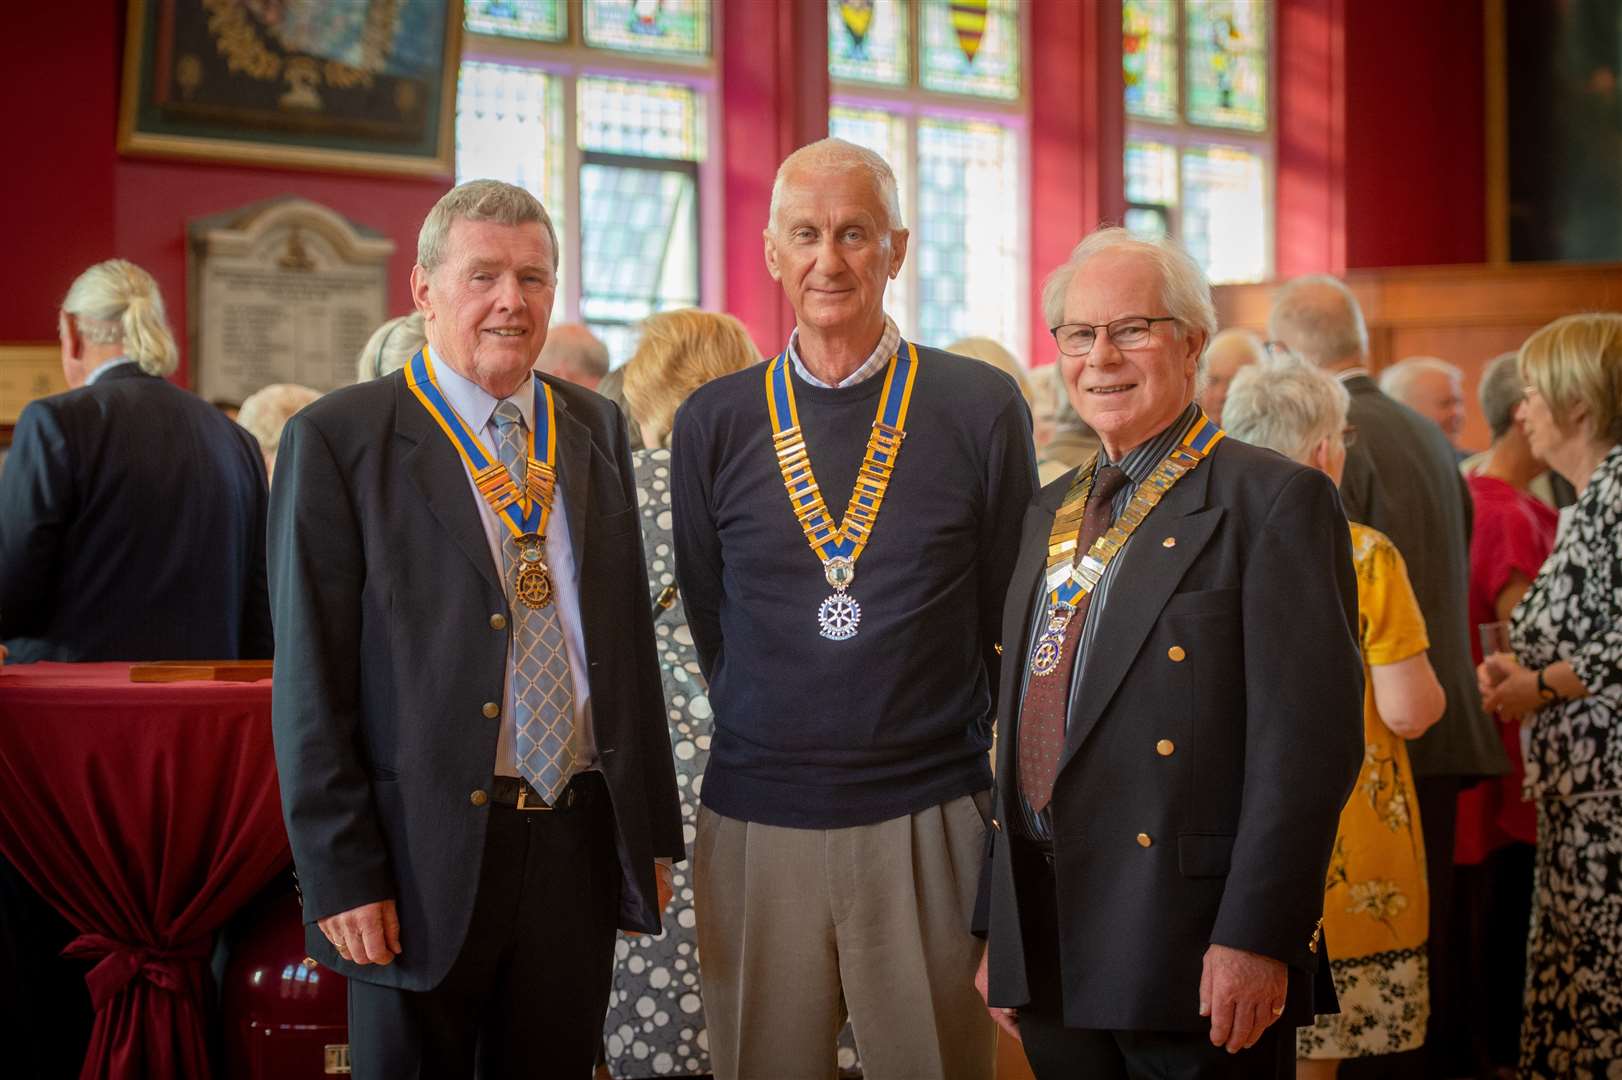 Alex Craib, Alan Goff and Ormond Smith were among those attending the civic reception at Inverness Town House to mark the centenary of the Rotary Club of Inverness.